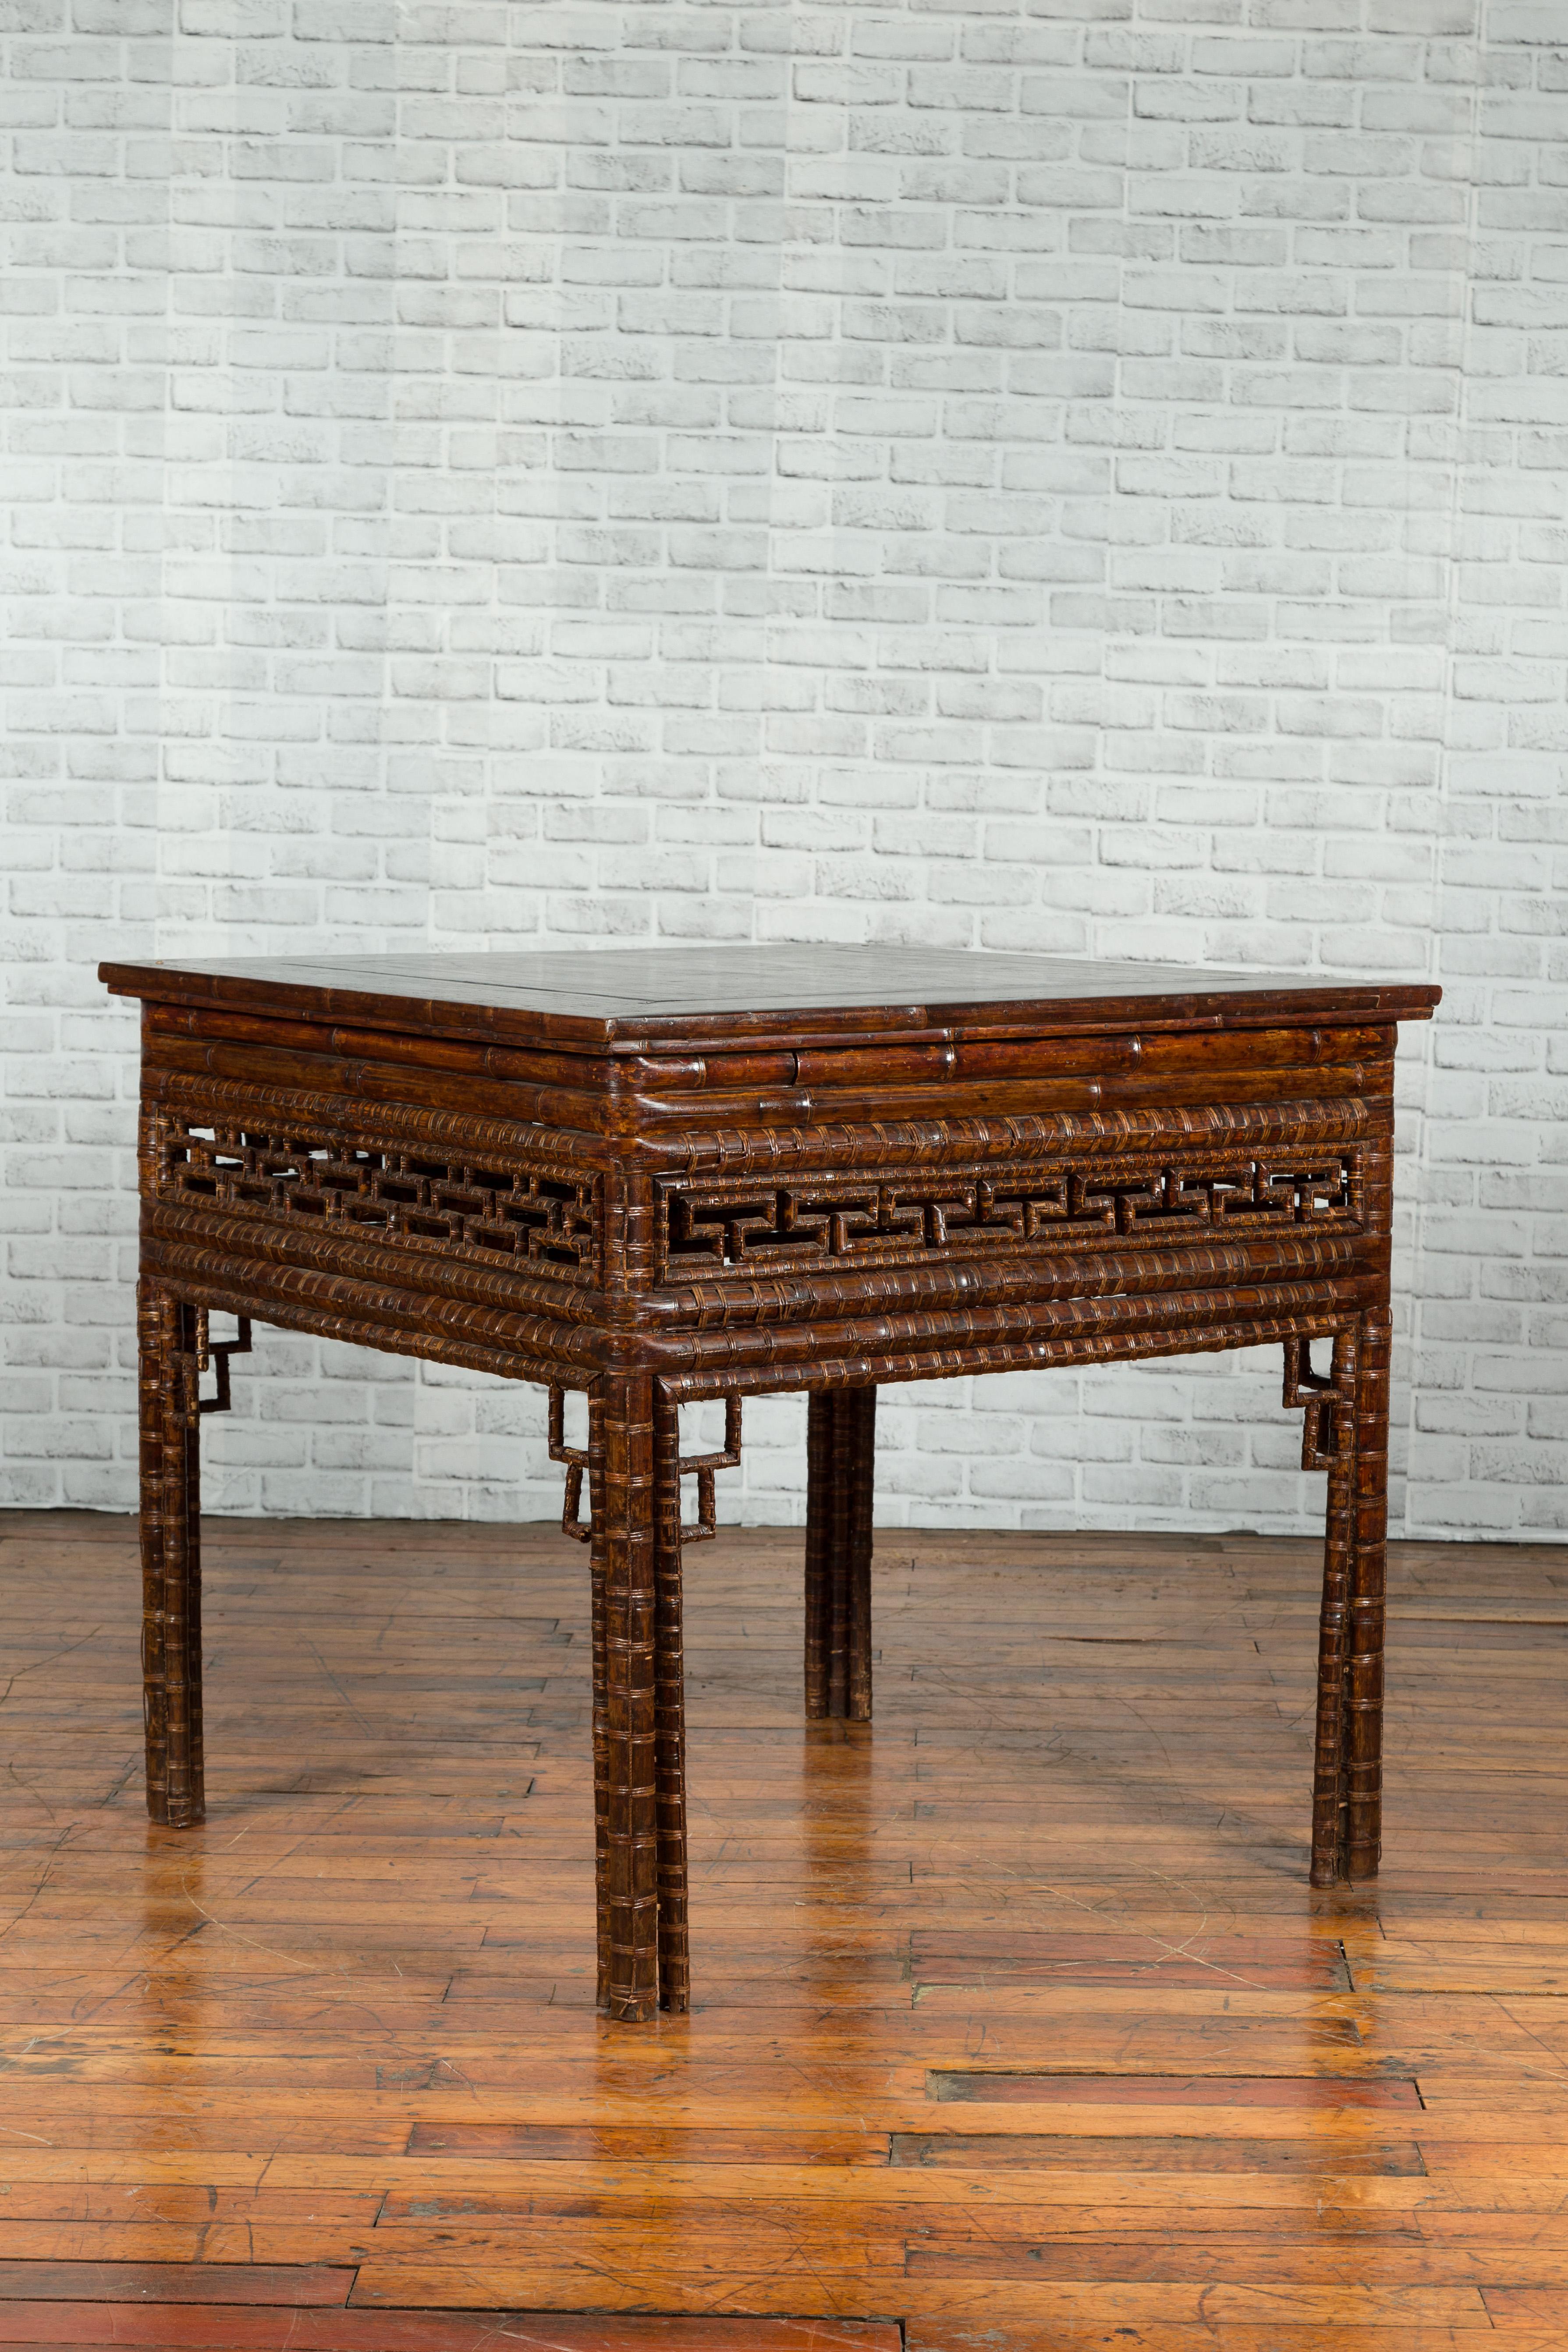 Chinese Qing Dynasty Period 19th Century Bamboo Hall Table with Fretwork Motifs For Sale 7